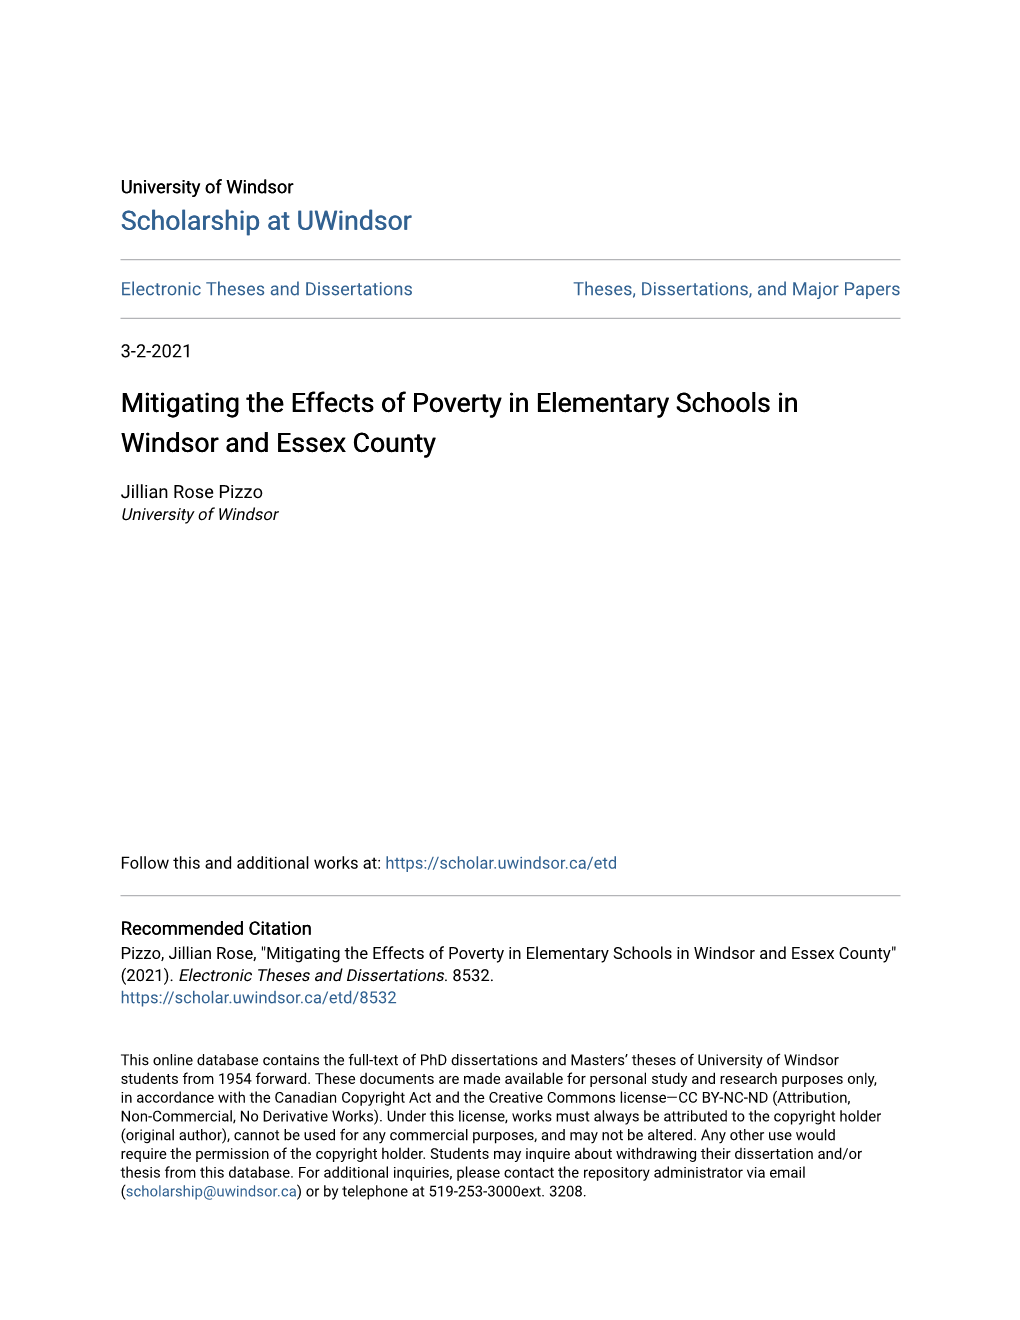 Mitigating the Effects of Poverty in Elementary Schools in Windsor and Essex County